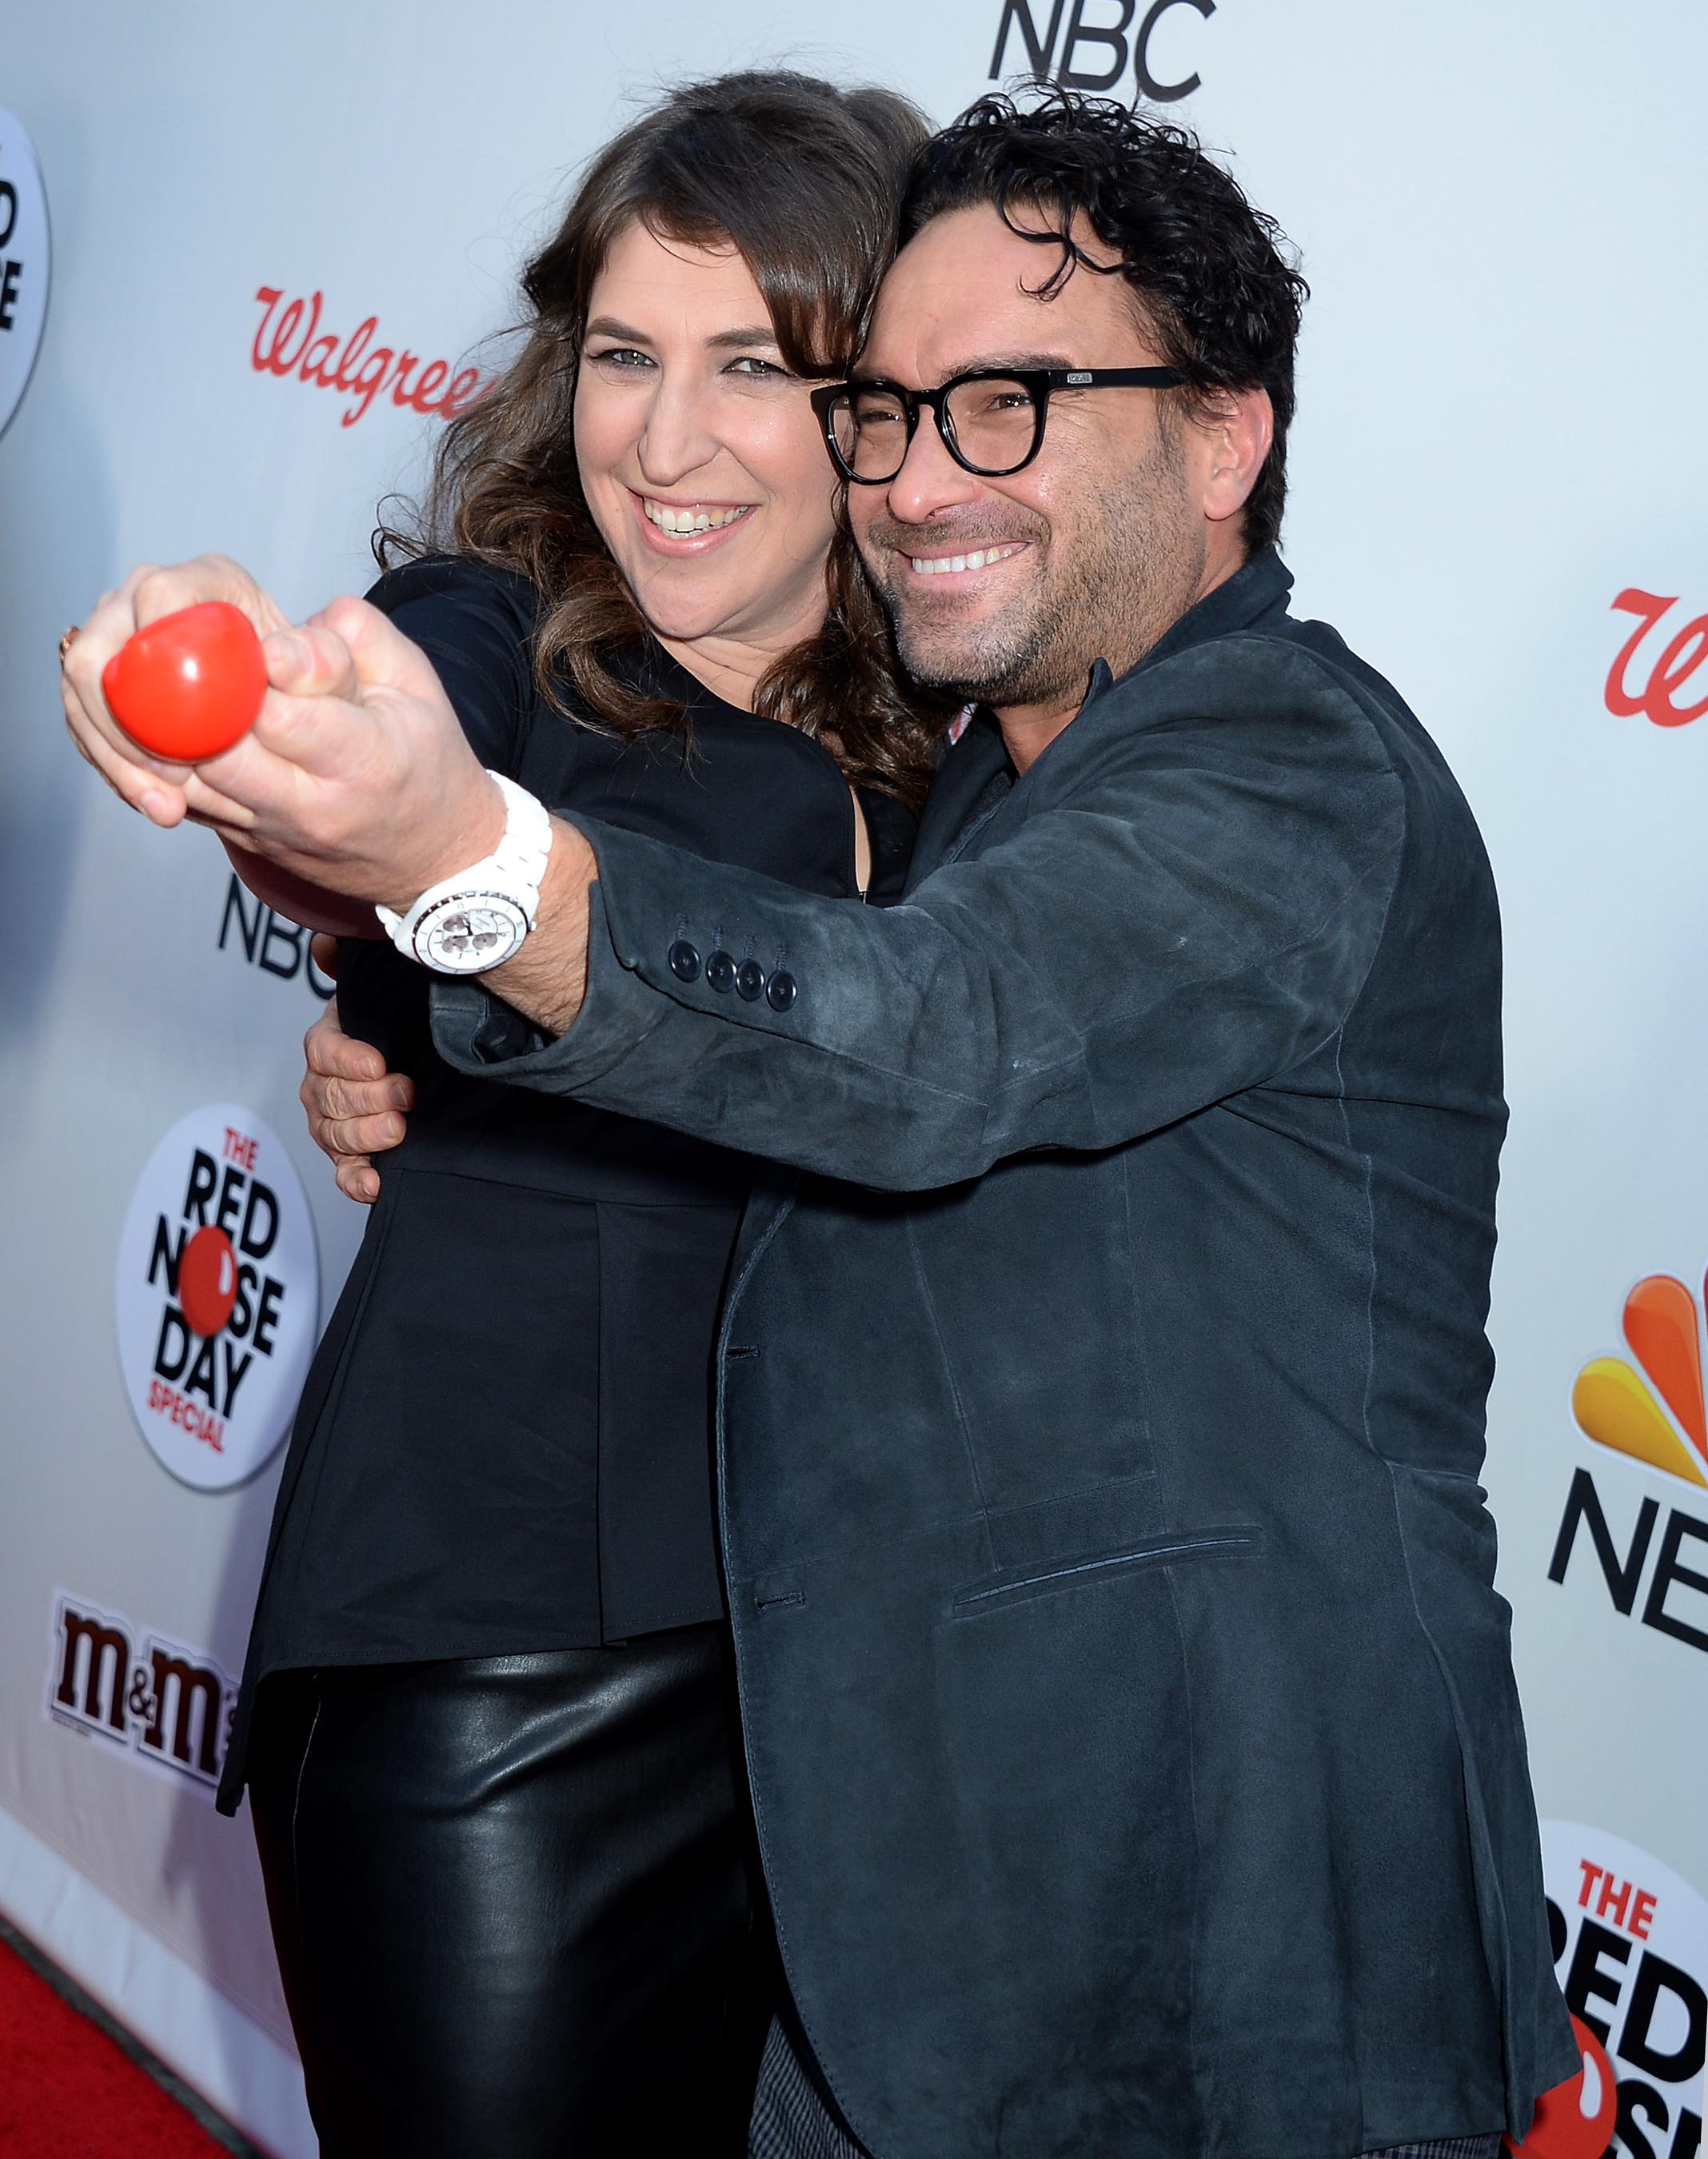 Mayim Bialik attends NBC Red Nose Day Special